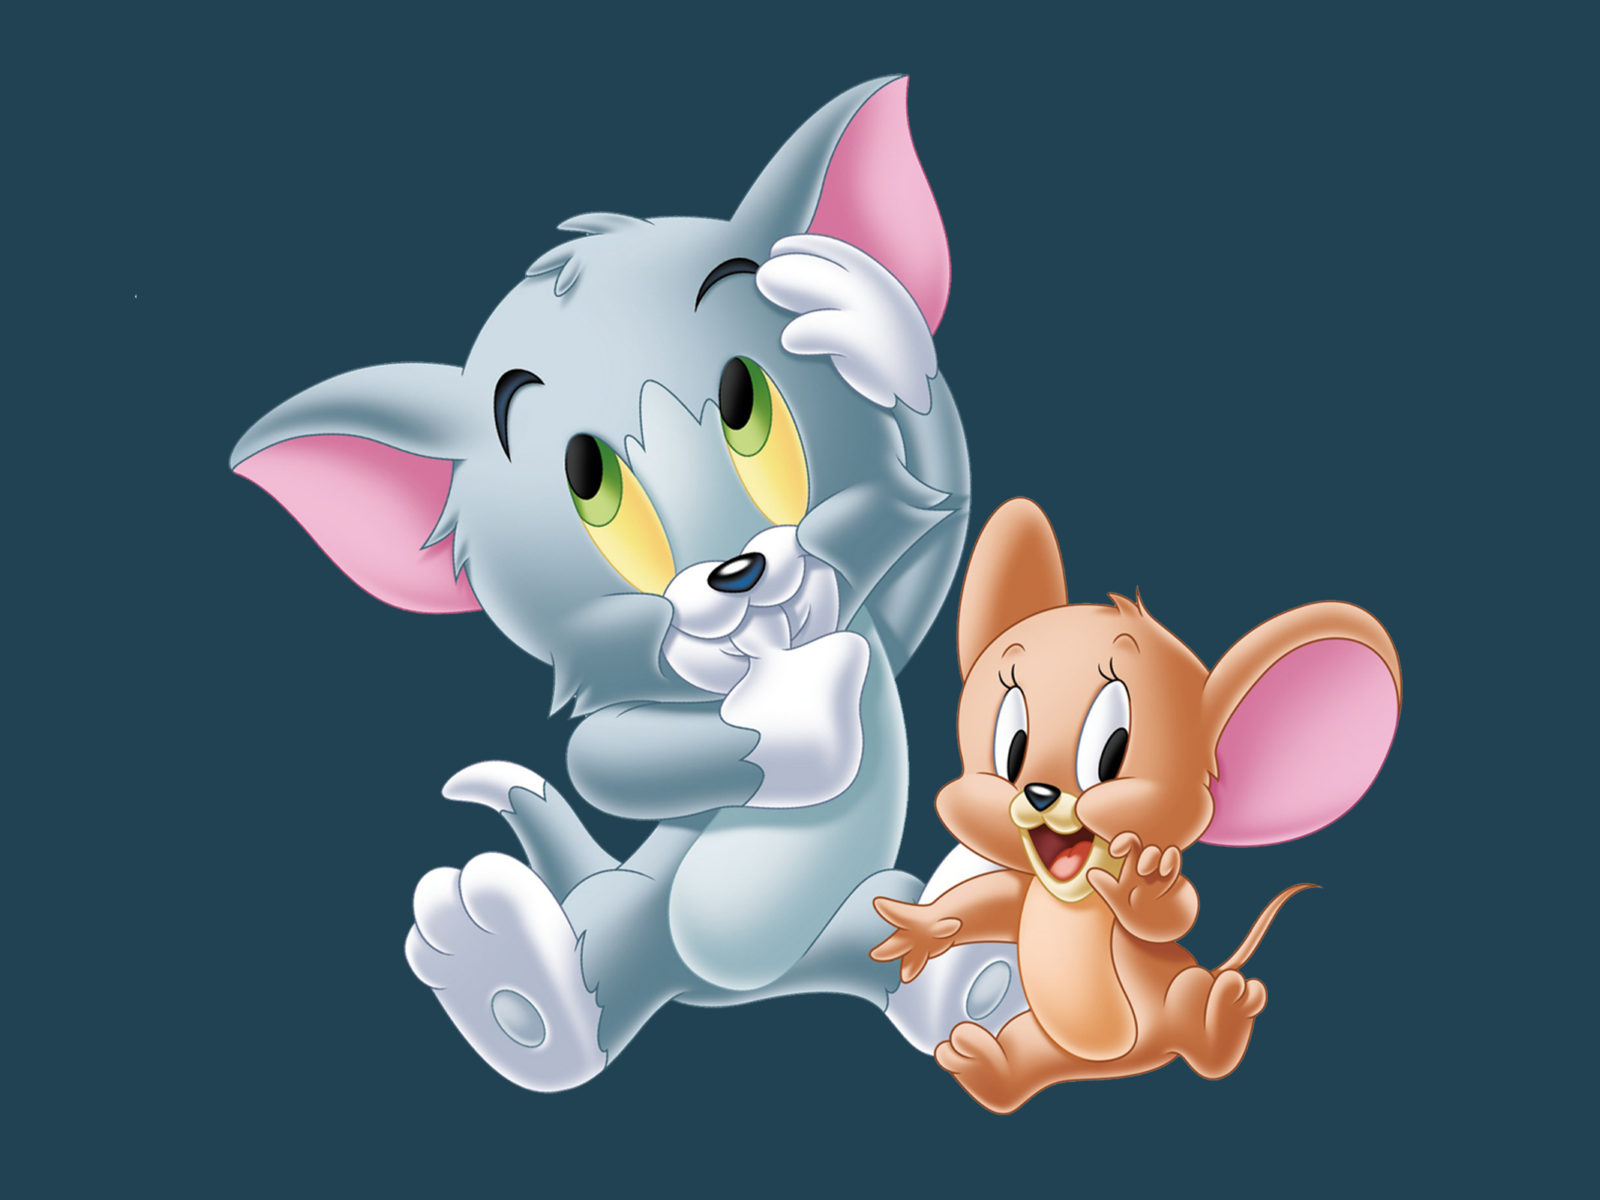 Tom And Jerry As Small Babies Desktop HD Wallpaper For Mobile Phones Tablet And Pc 2560x1600, Wallpaper13.com